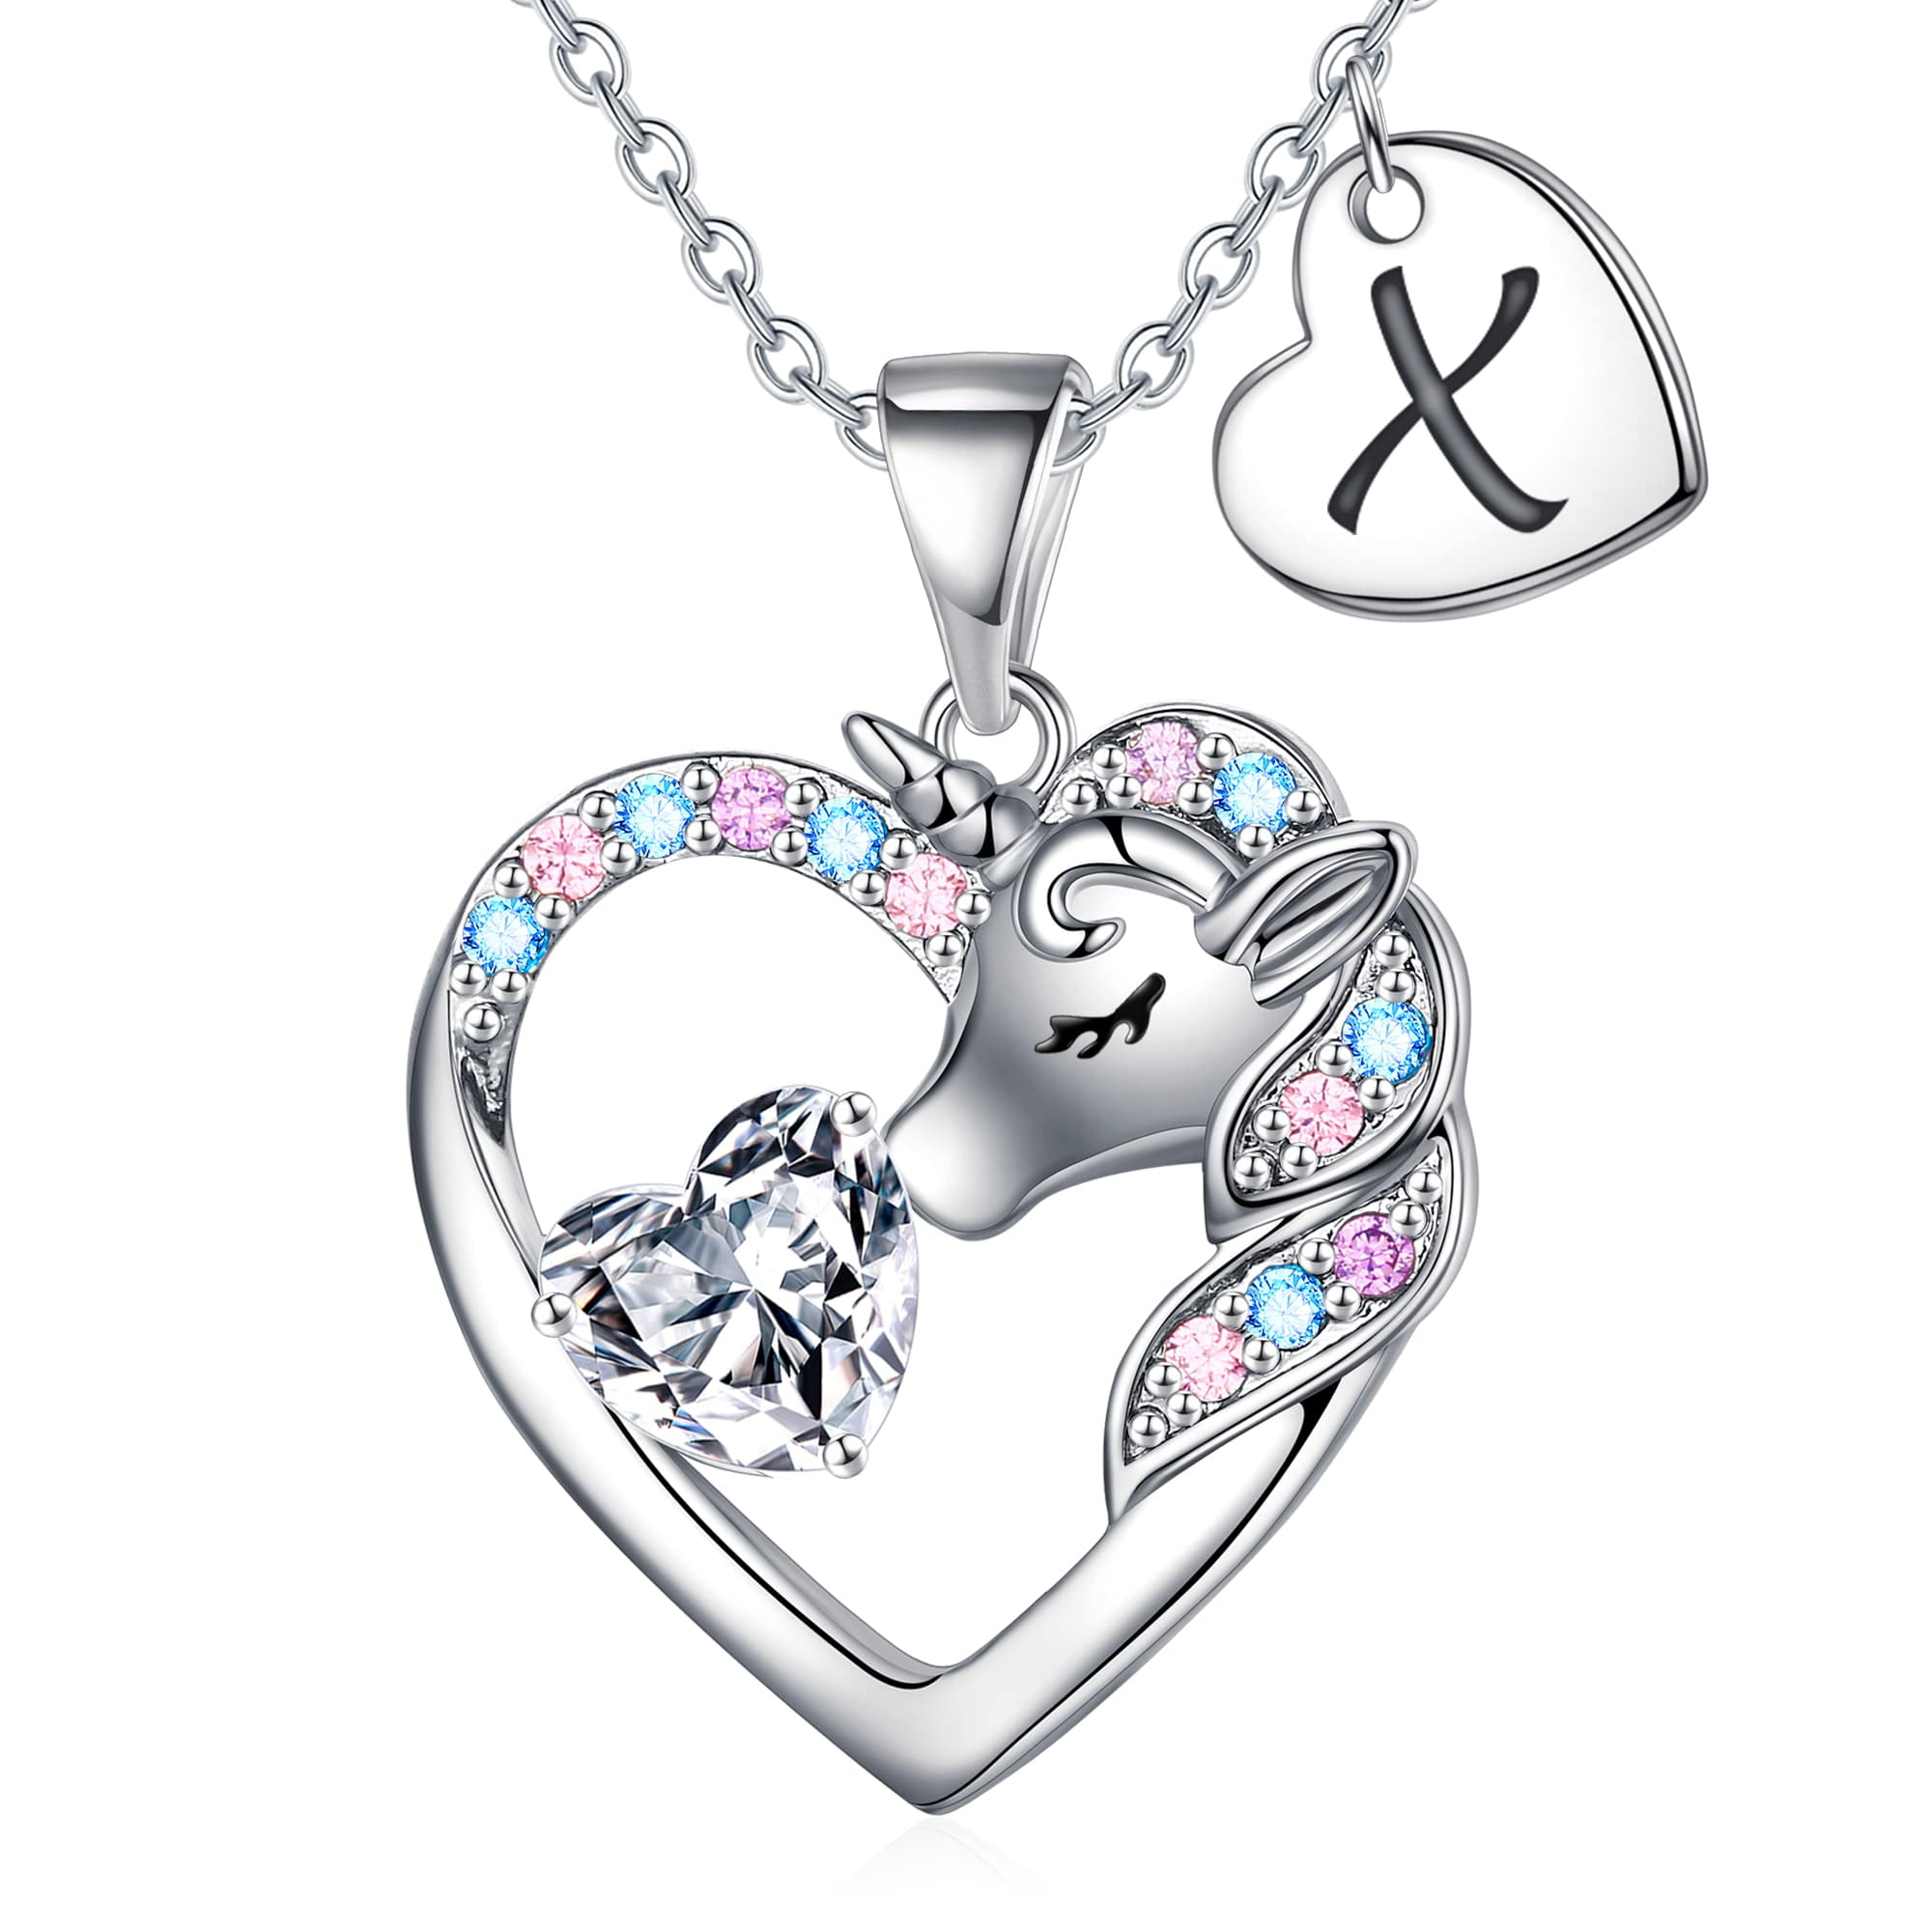 Iefshiny Unicorn Necklace for Girls 14K Gold Plated Colorful CZ Heart Initial Necklace for Girls Daughters Wife Unicorn Jewelry Gifts, Women's, Size